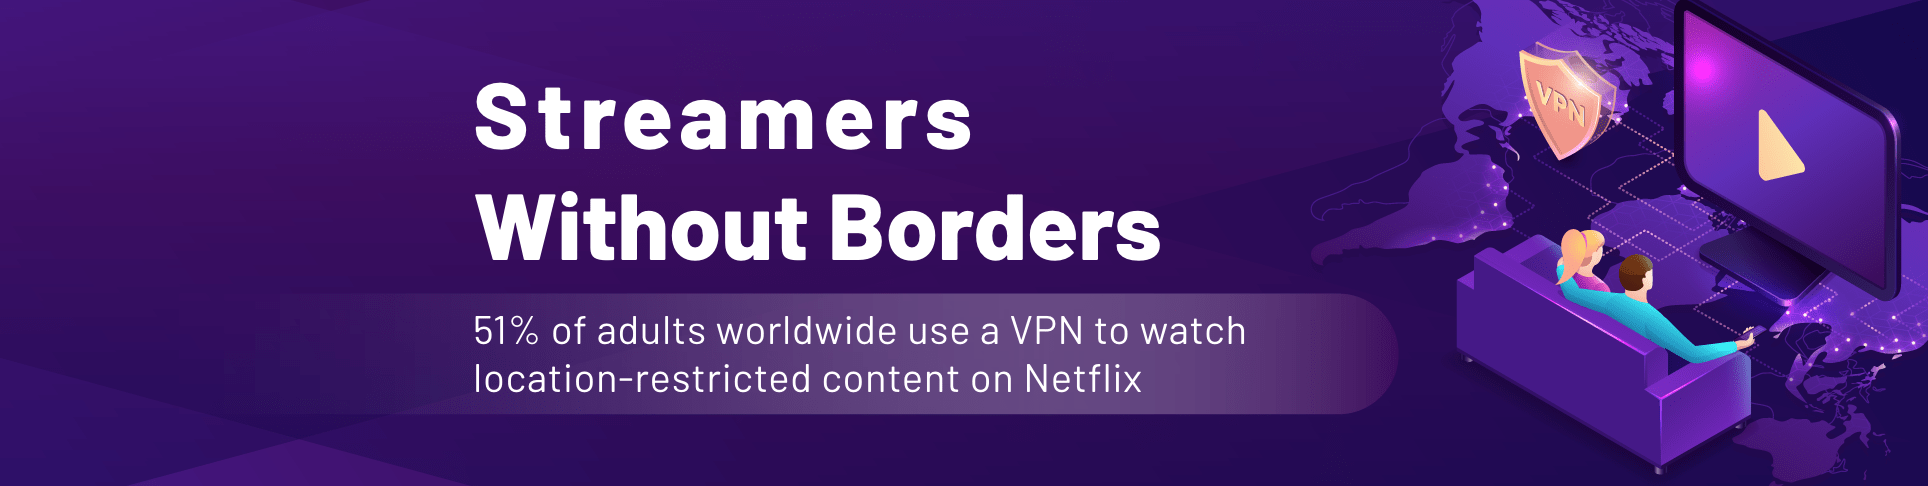 Streaming Across Borders: 51% of Adults Worldwide Use a VPN to Watch Location Restricted Content on Netflix